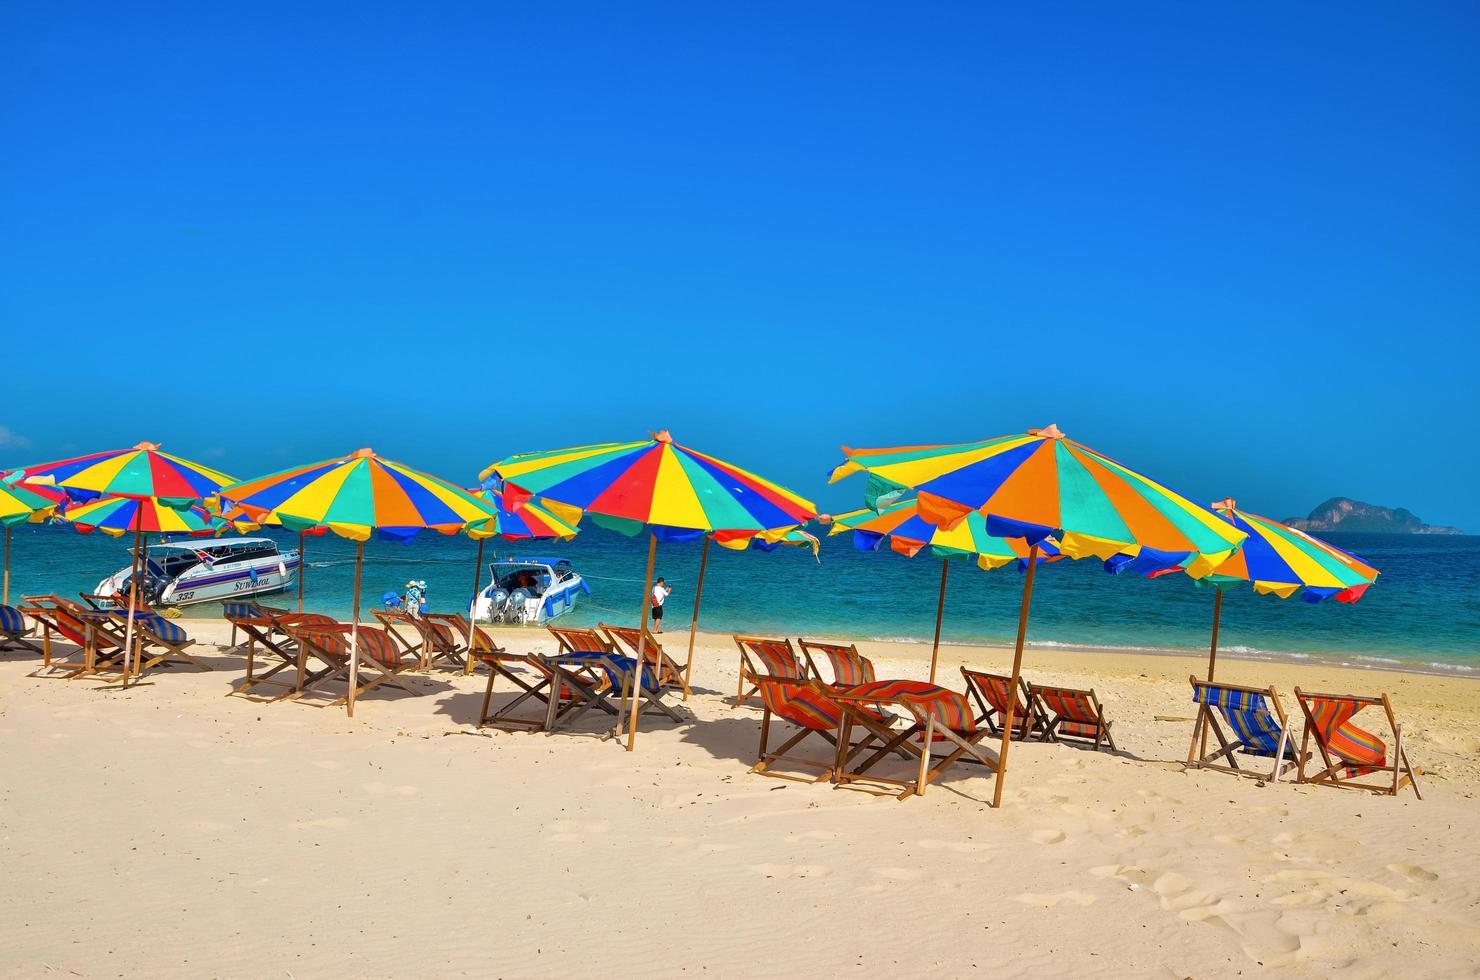 Phuket, Thailand, 2020 - Chairs and colorful umbrellas on a beach photo